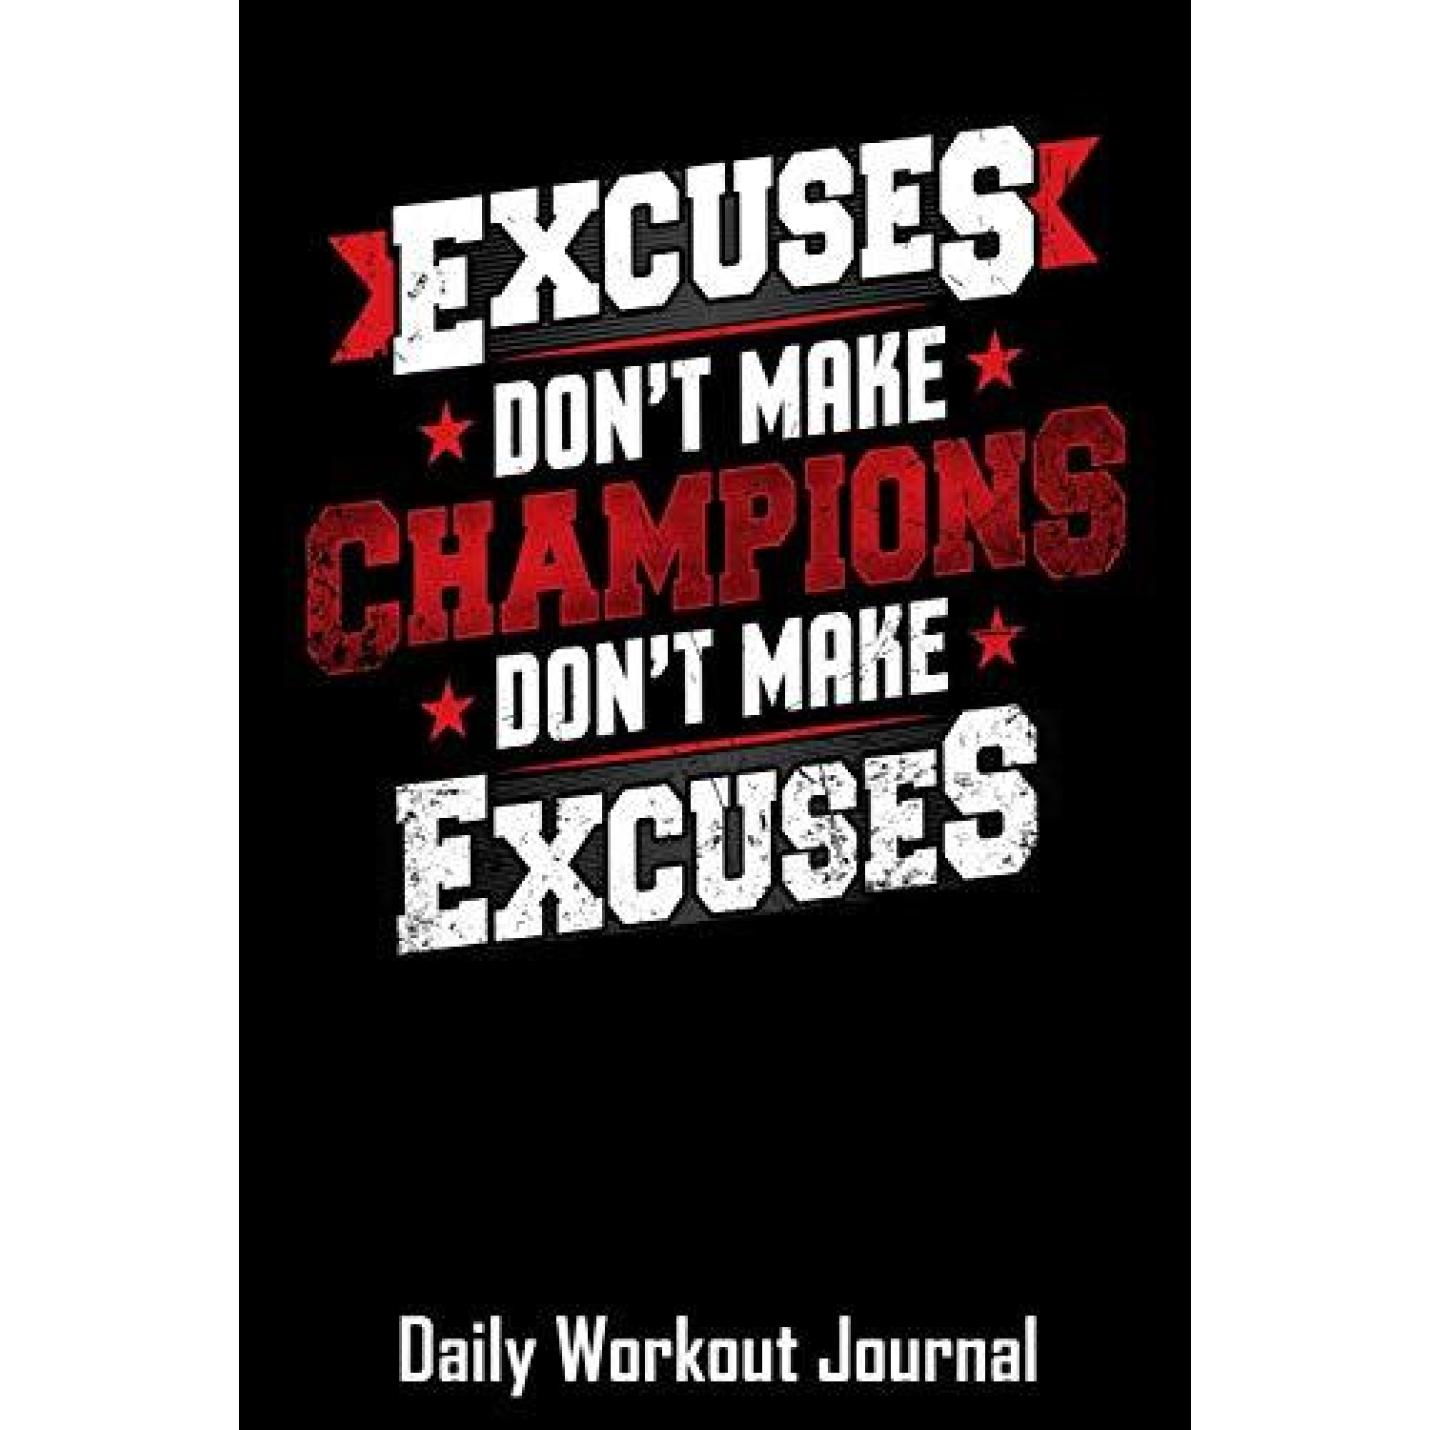 Excuses Don't Make Champions Don't Make Excuses: Daily Workout Journal with One Rep Max and Treadmill Conversion Charts Paperback